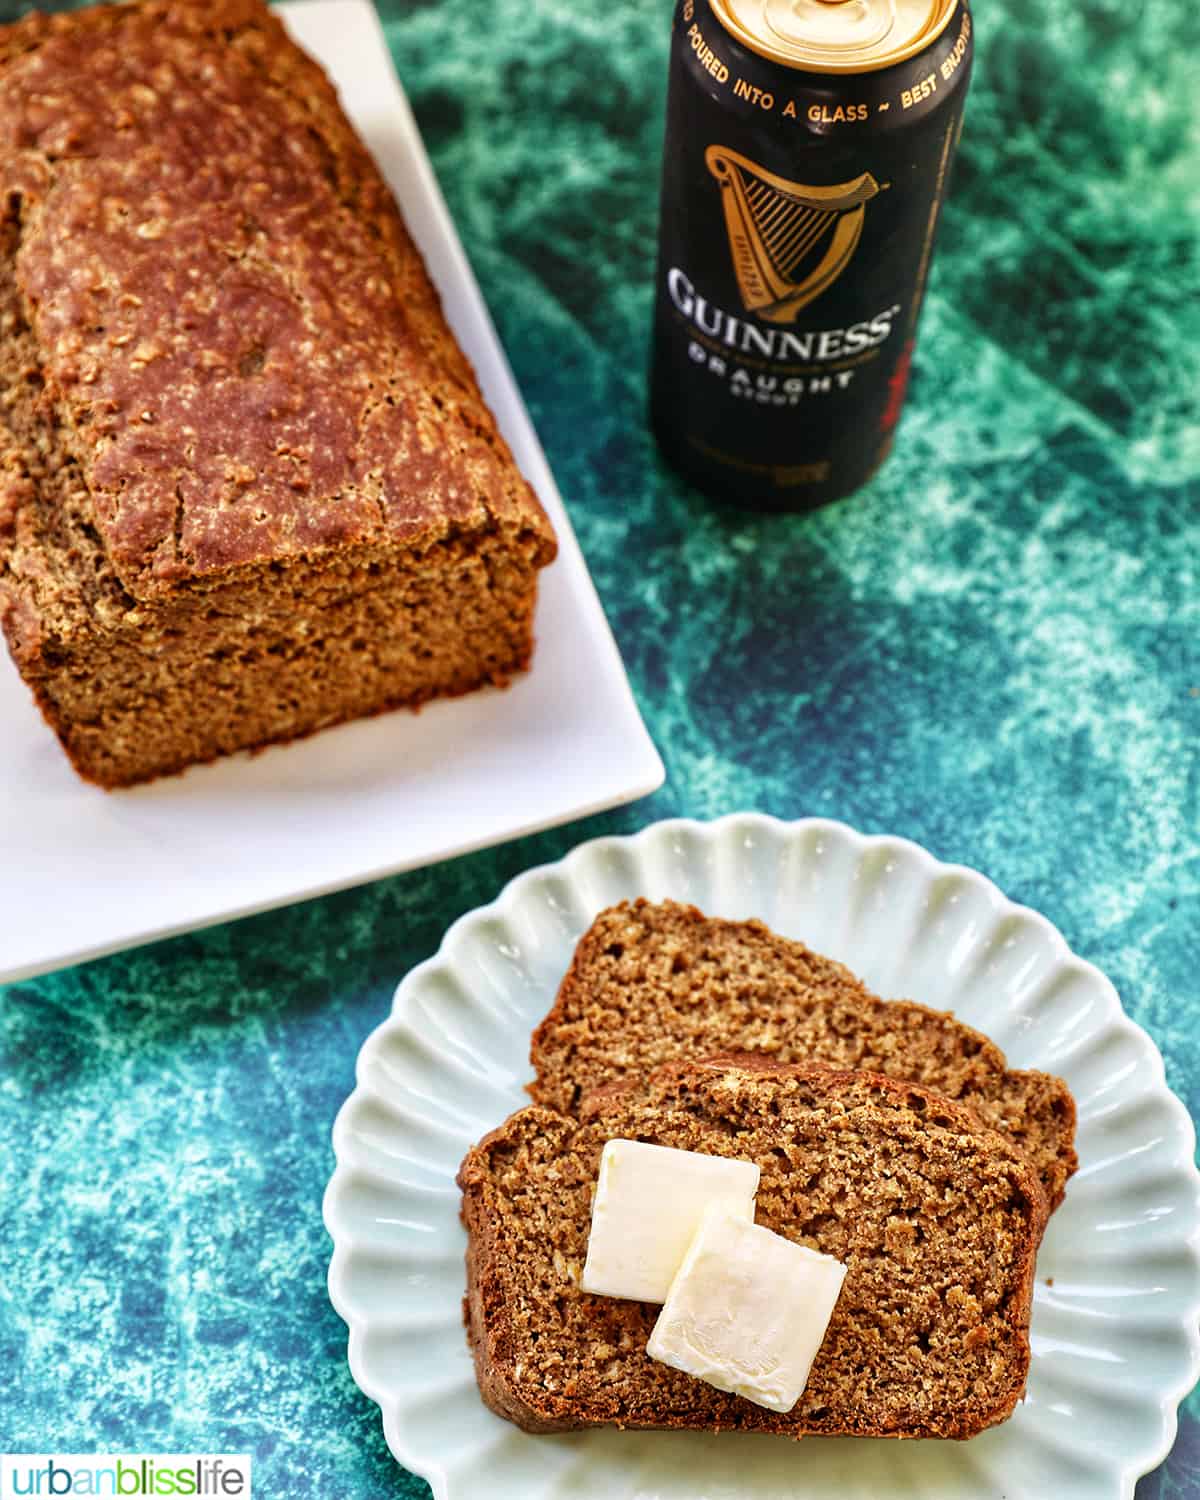 loaf of Irish brown bread with a Guinness beer